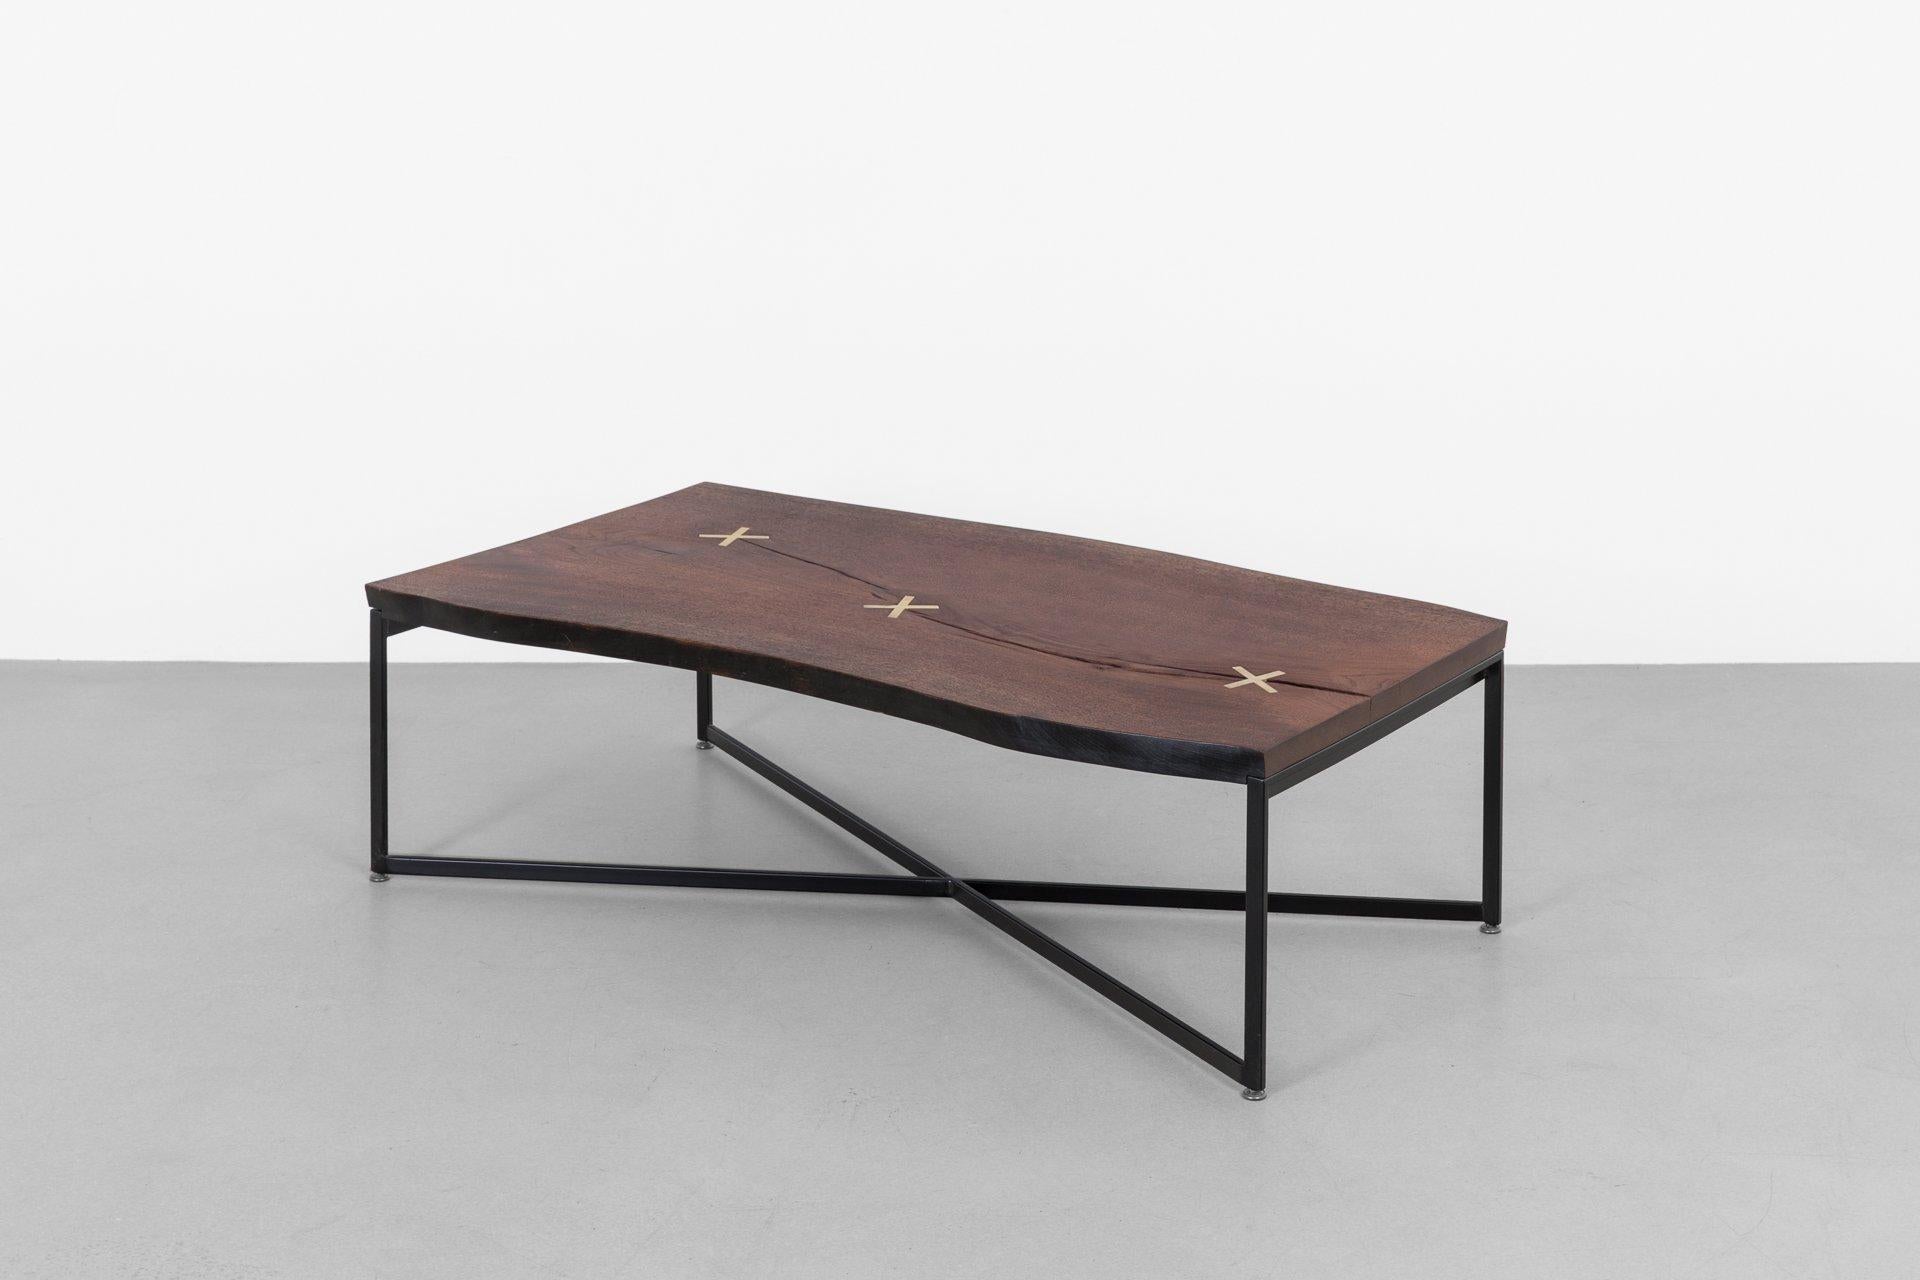 The Stitch coffee table showcases the rich grain of gorgeous walnut slab. Each coffee table embraces walnut's naturally occurring checks, which are reinforced with X-shaped brass stitches. The inset stitches beautifully contrast the chocolate tones